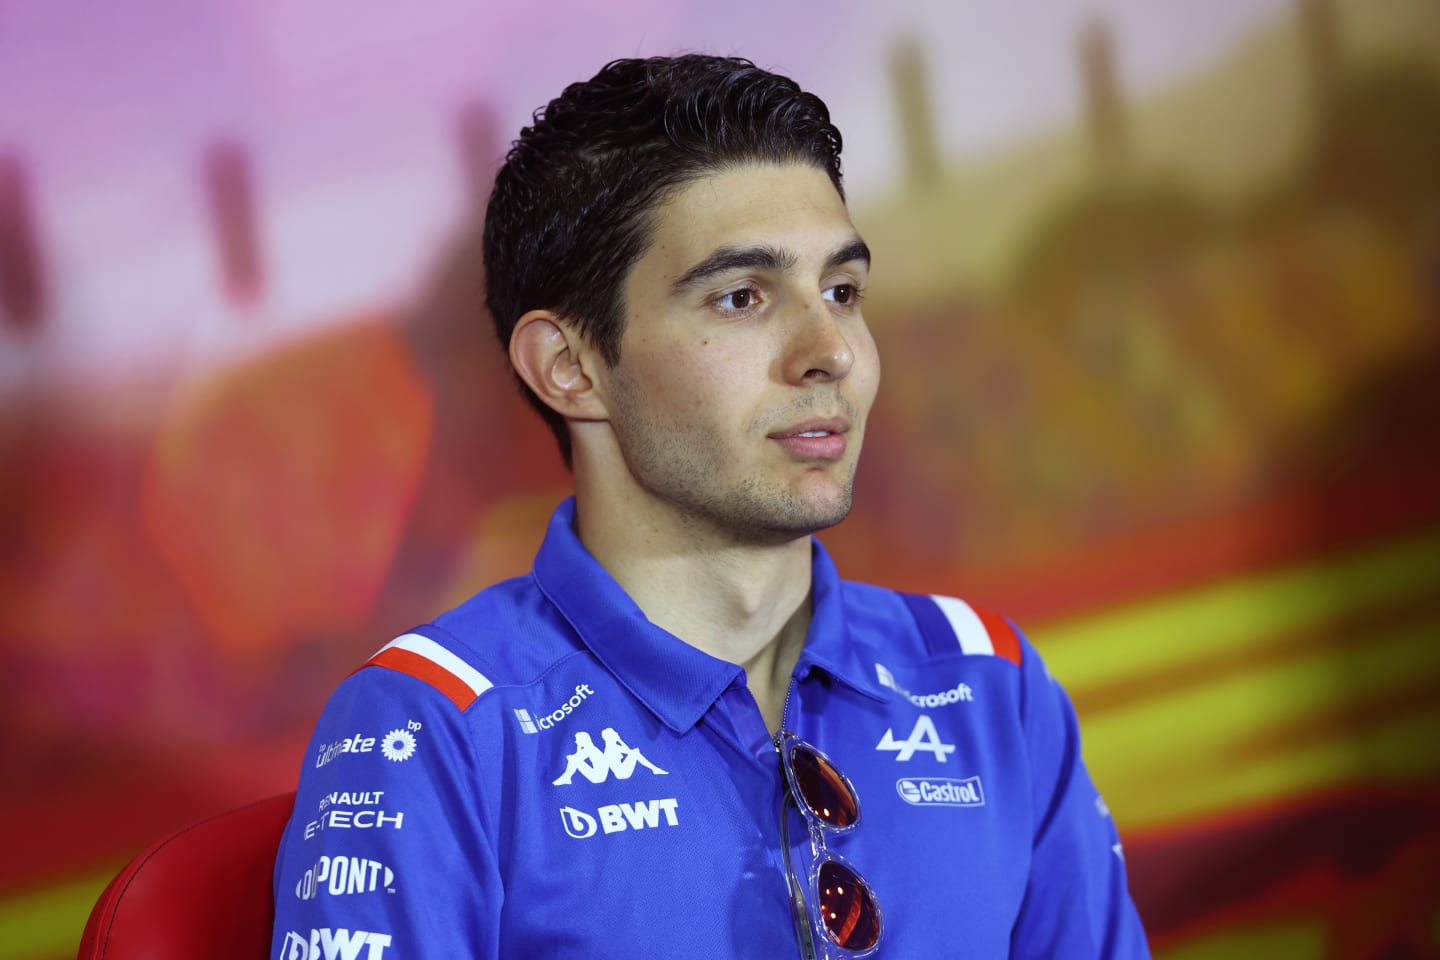 BARCELONA, SPAIN - MAY 20: Esteban Ocon of France and Alpine F1 looks on in the Drivers Press Conference prior to practice ahead of the F1 Grand Prix of Spain at Circuit de Barcelona-Catalunya on May 20, 2022 in Barcelona, Spain. (Photo by Lars Baron/Getty Images)